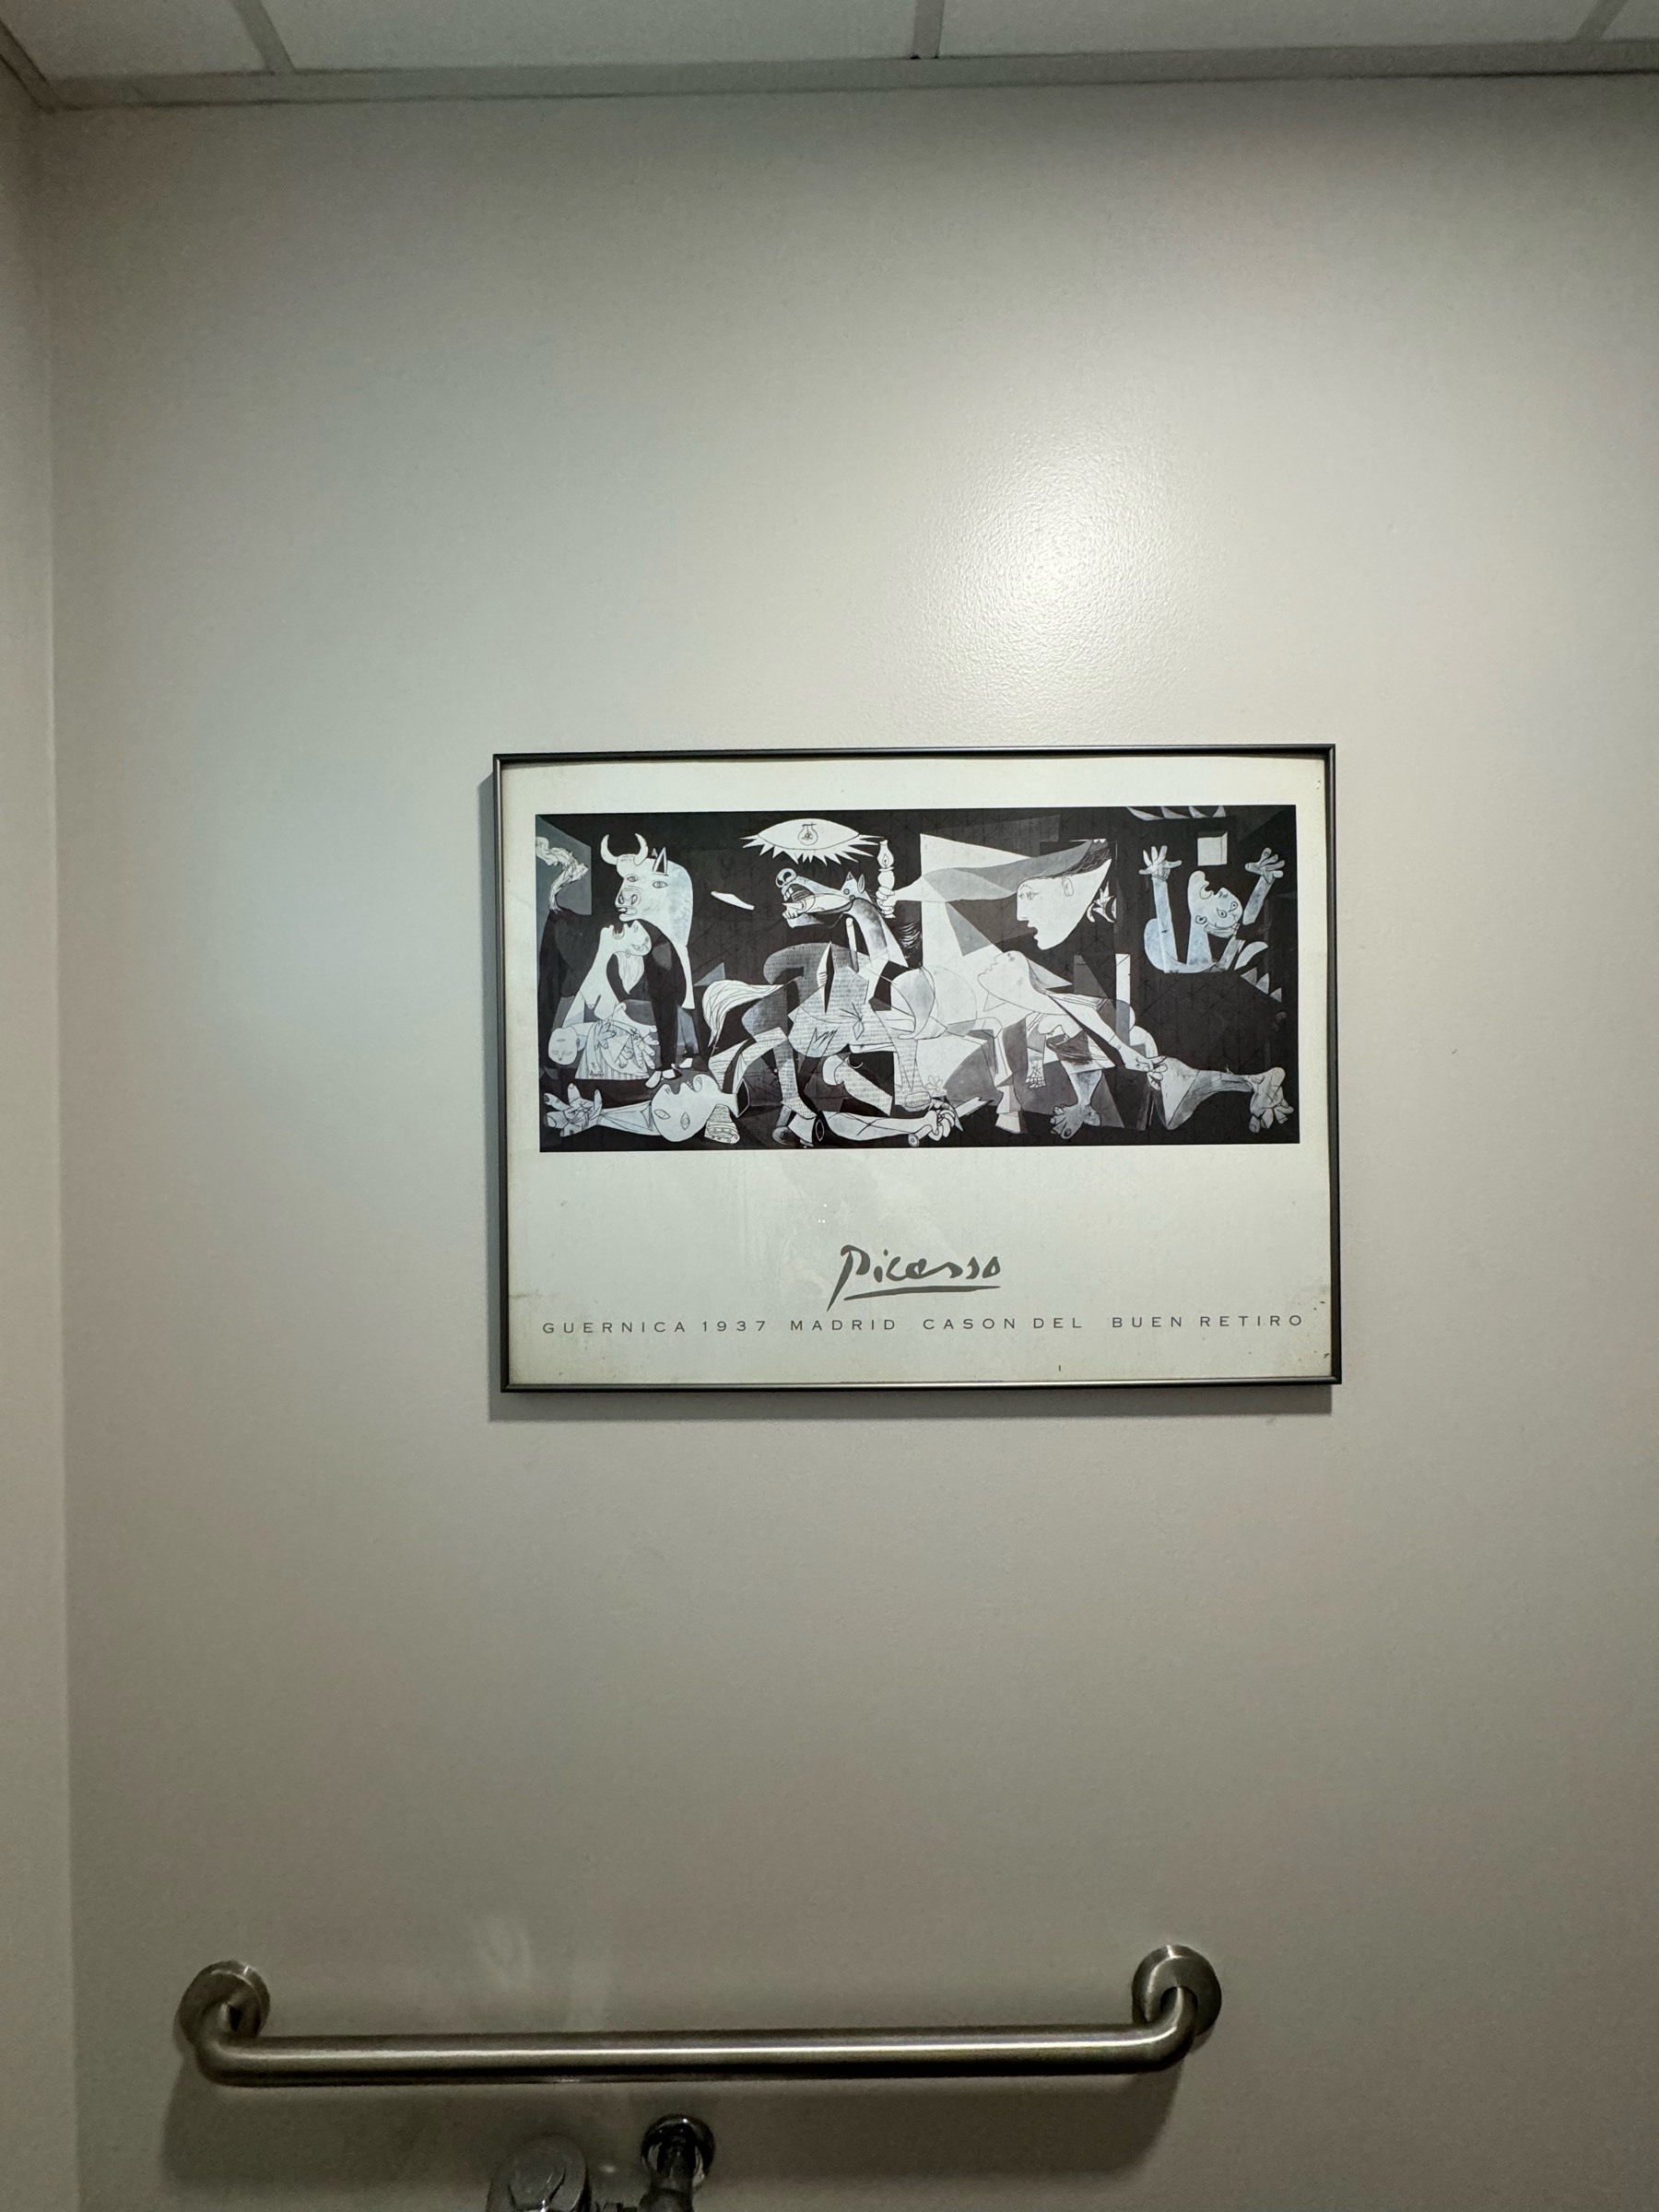 A reproduction of Pablo Picasso's Guernica hangs on the wall above a toilet in a public restroom; you can see the hint of a drop ceiling and an accessibility bar.